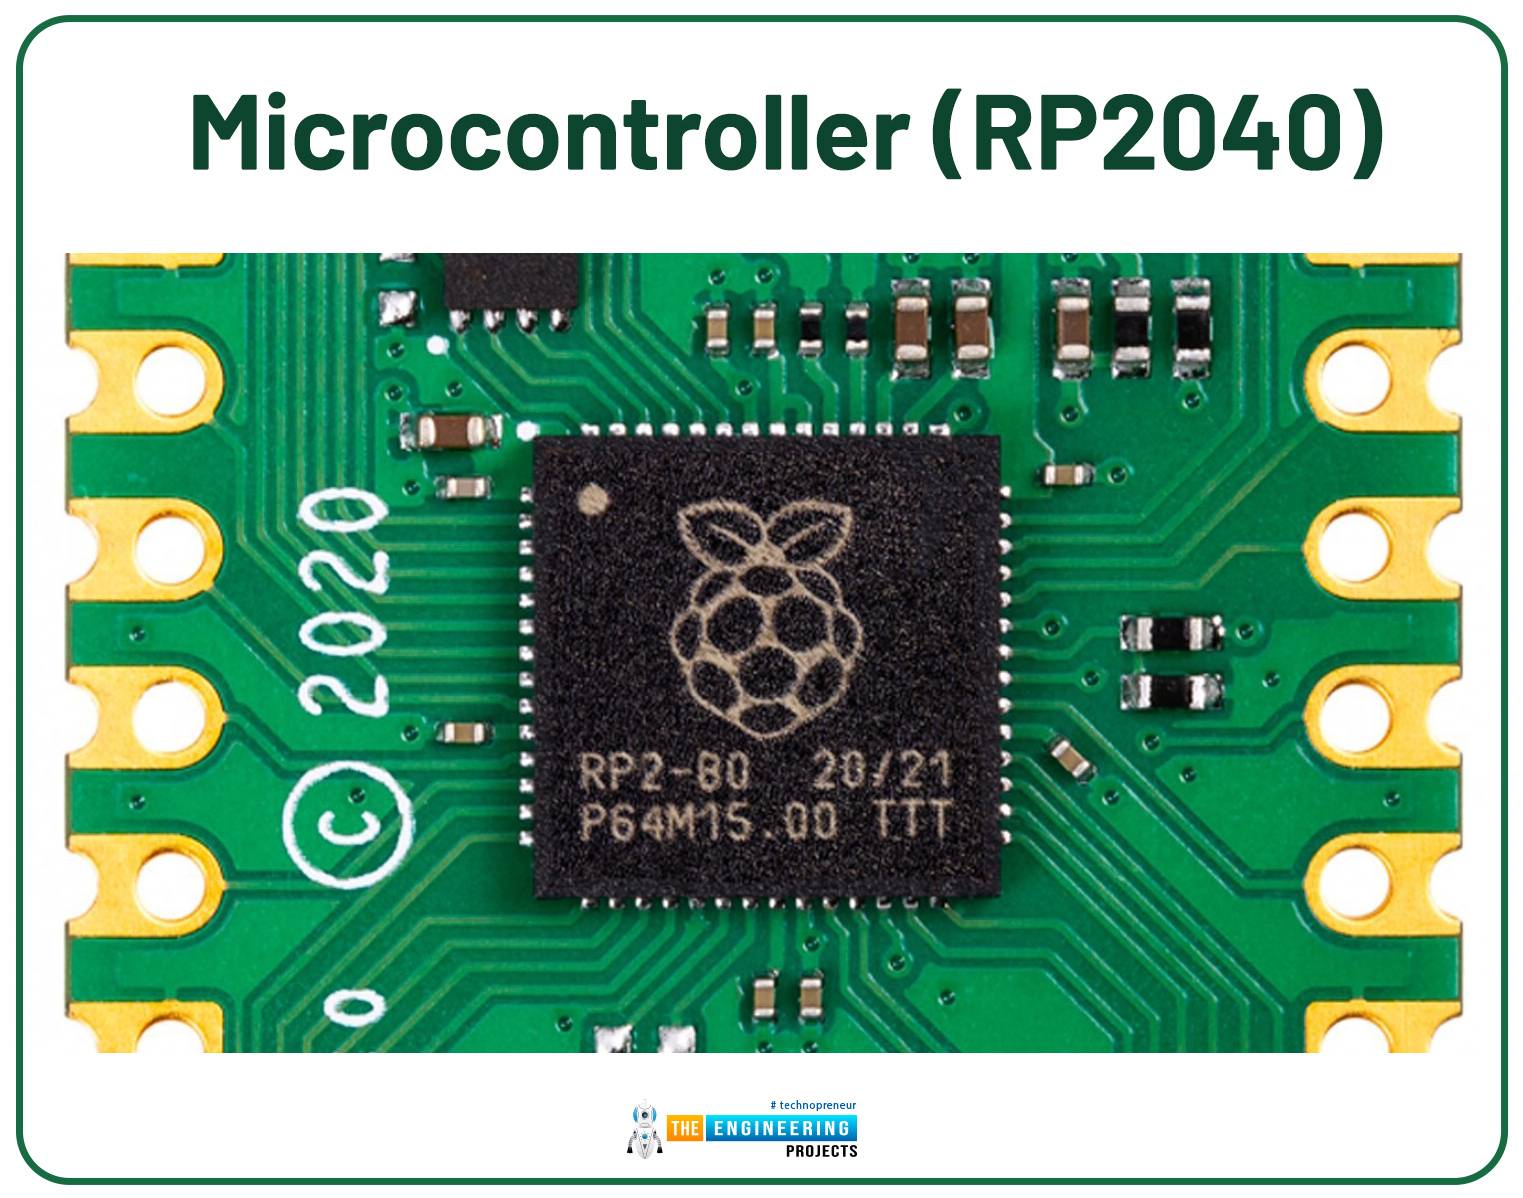 Introduction to Raspberry Pi Pico, what is RPi Pico, PRi Pico, Raspberry pi pico, basics of Pico, Pico basics, getting started with pico programming